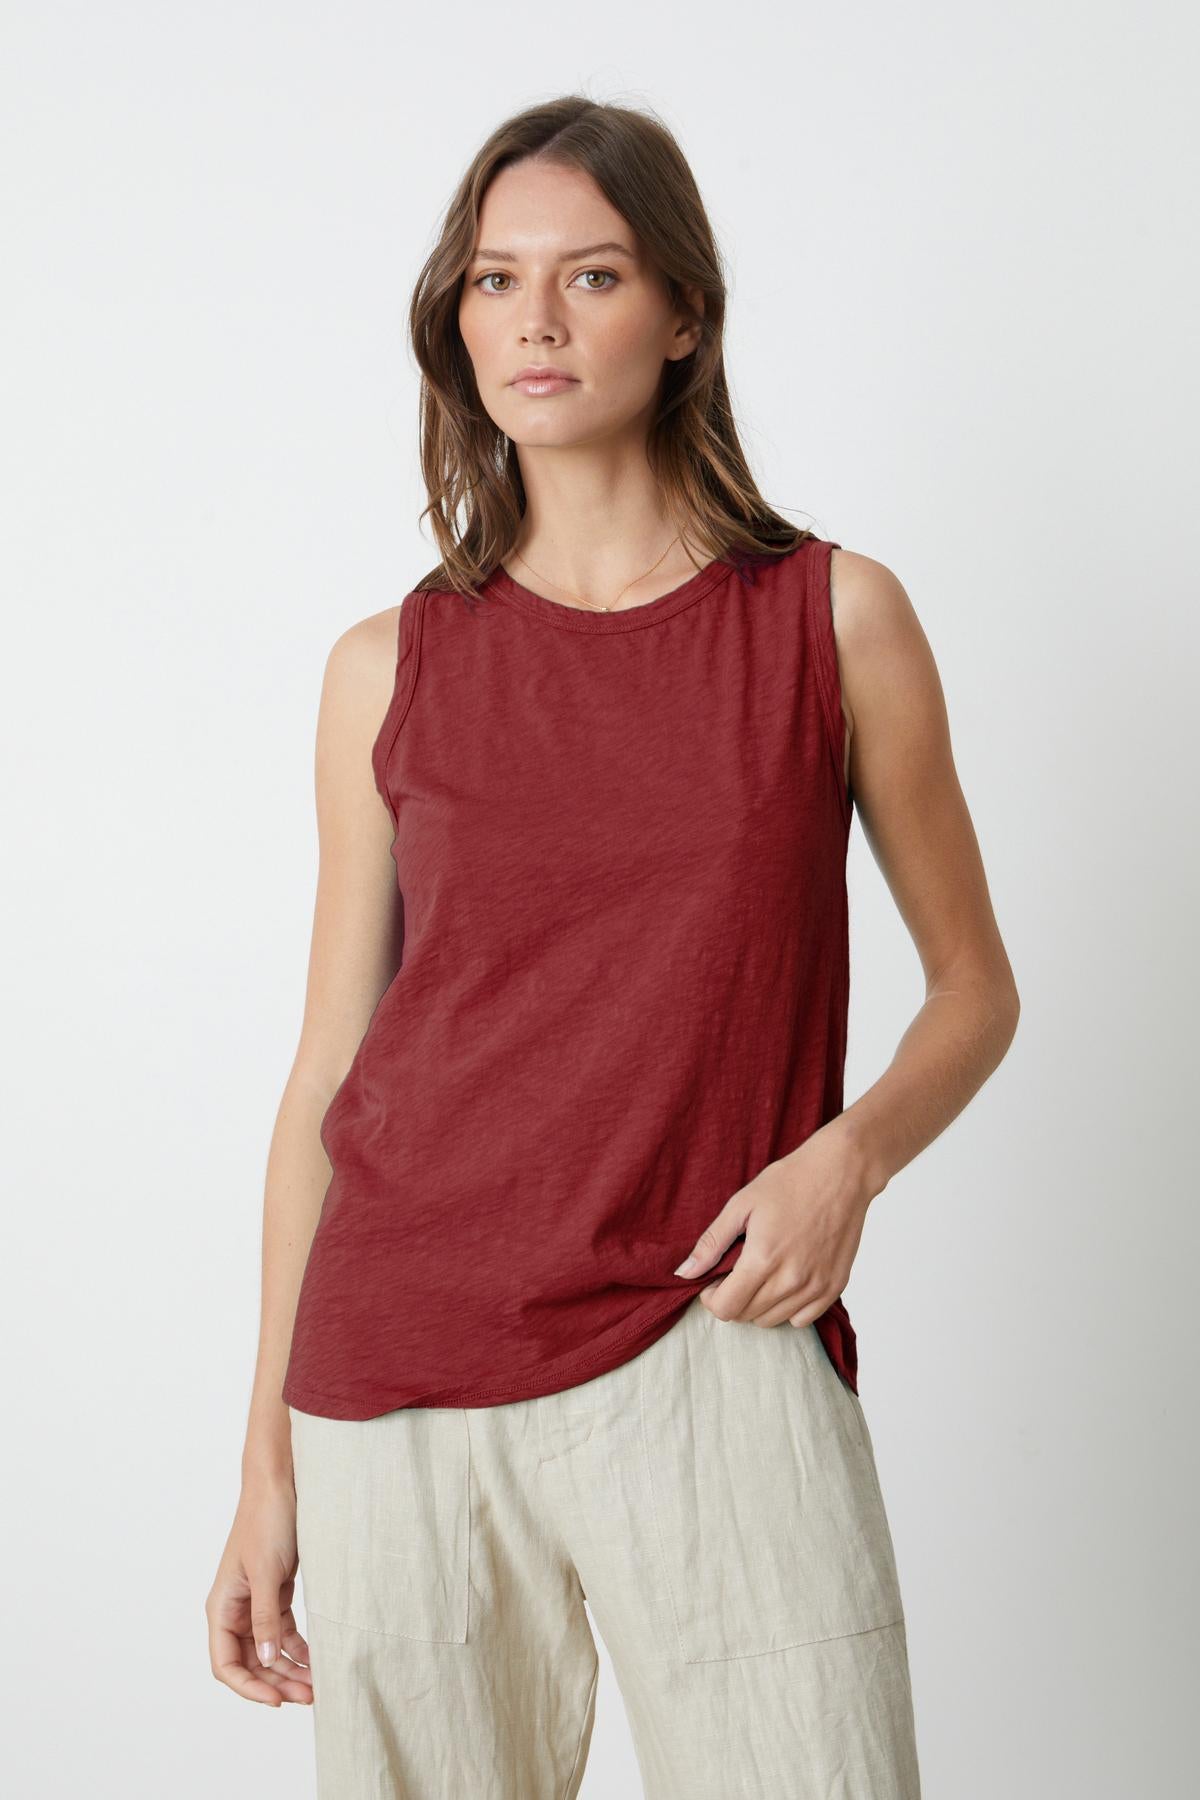   A woman in a burgundy TAURUS COTTON SLUB TANK by Velvet by Graham & Spencer and beige pants, styled in a crew-neck shirt. 